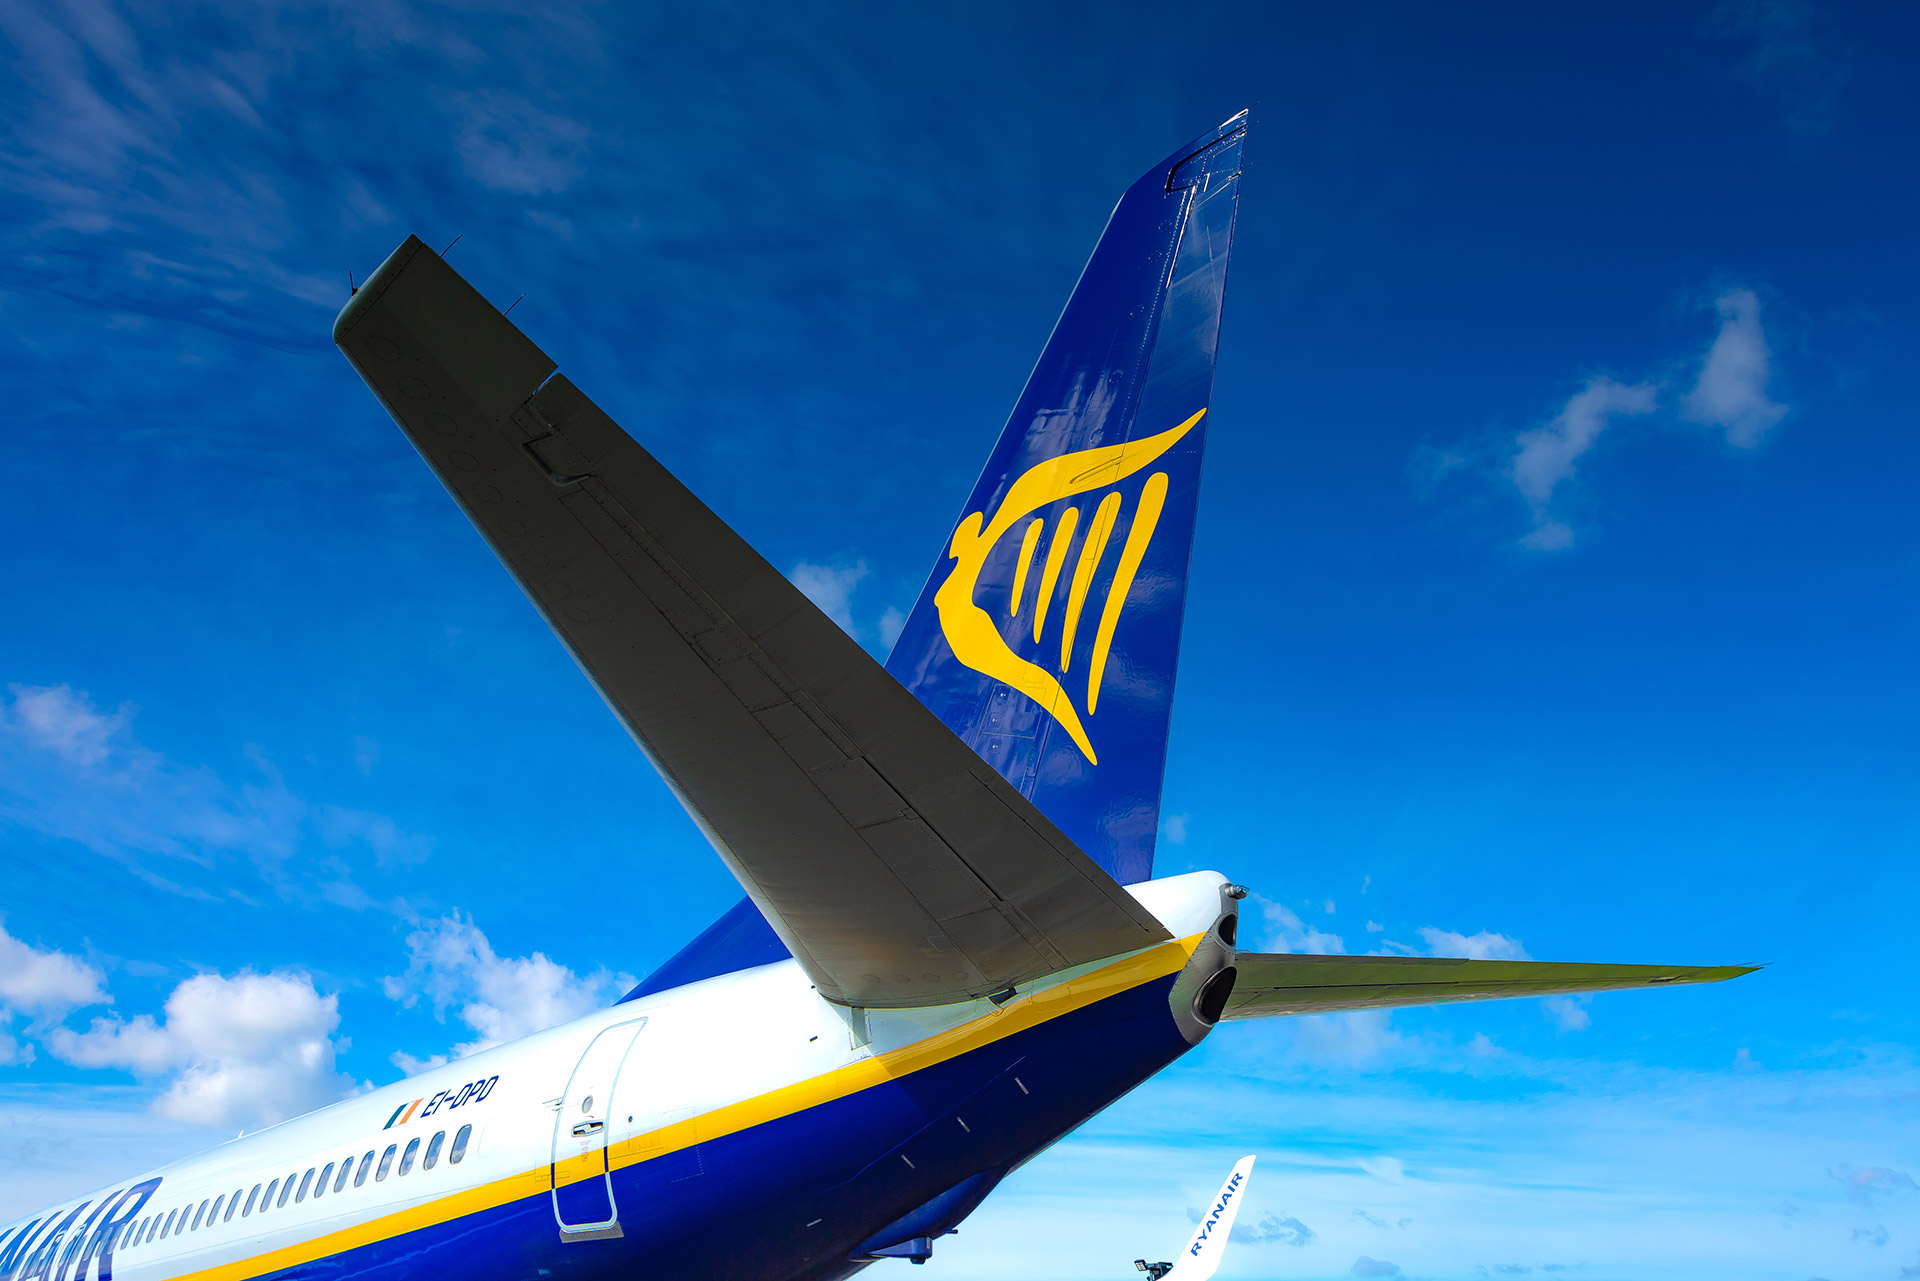 Join APC & Ryanair for a presentation on the Ryanair B737 Type Rating Programme